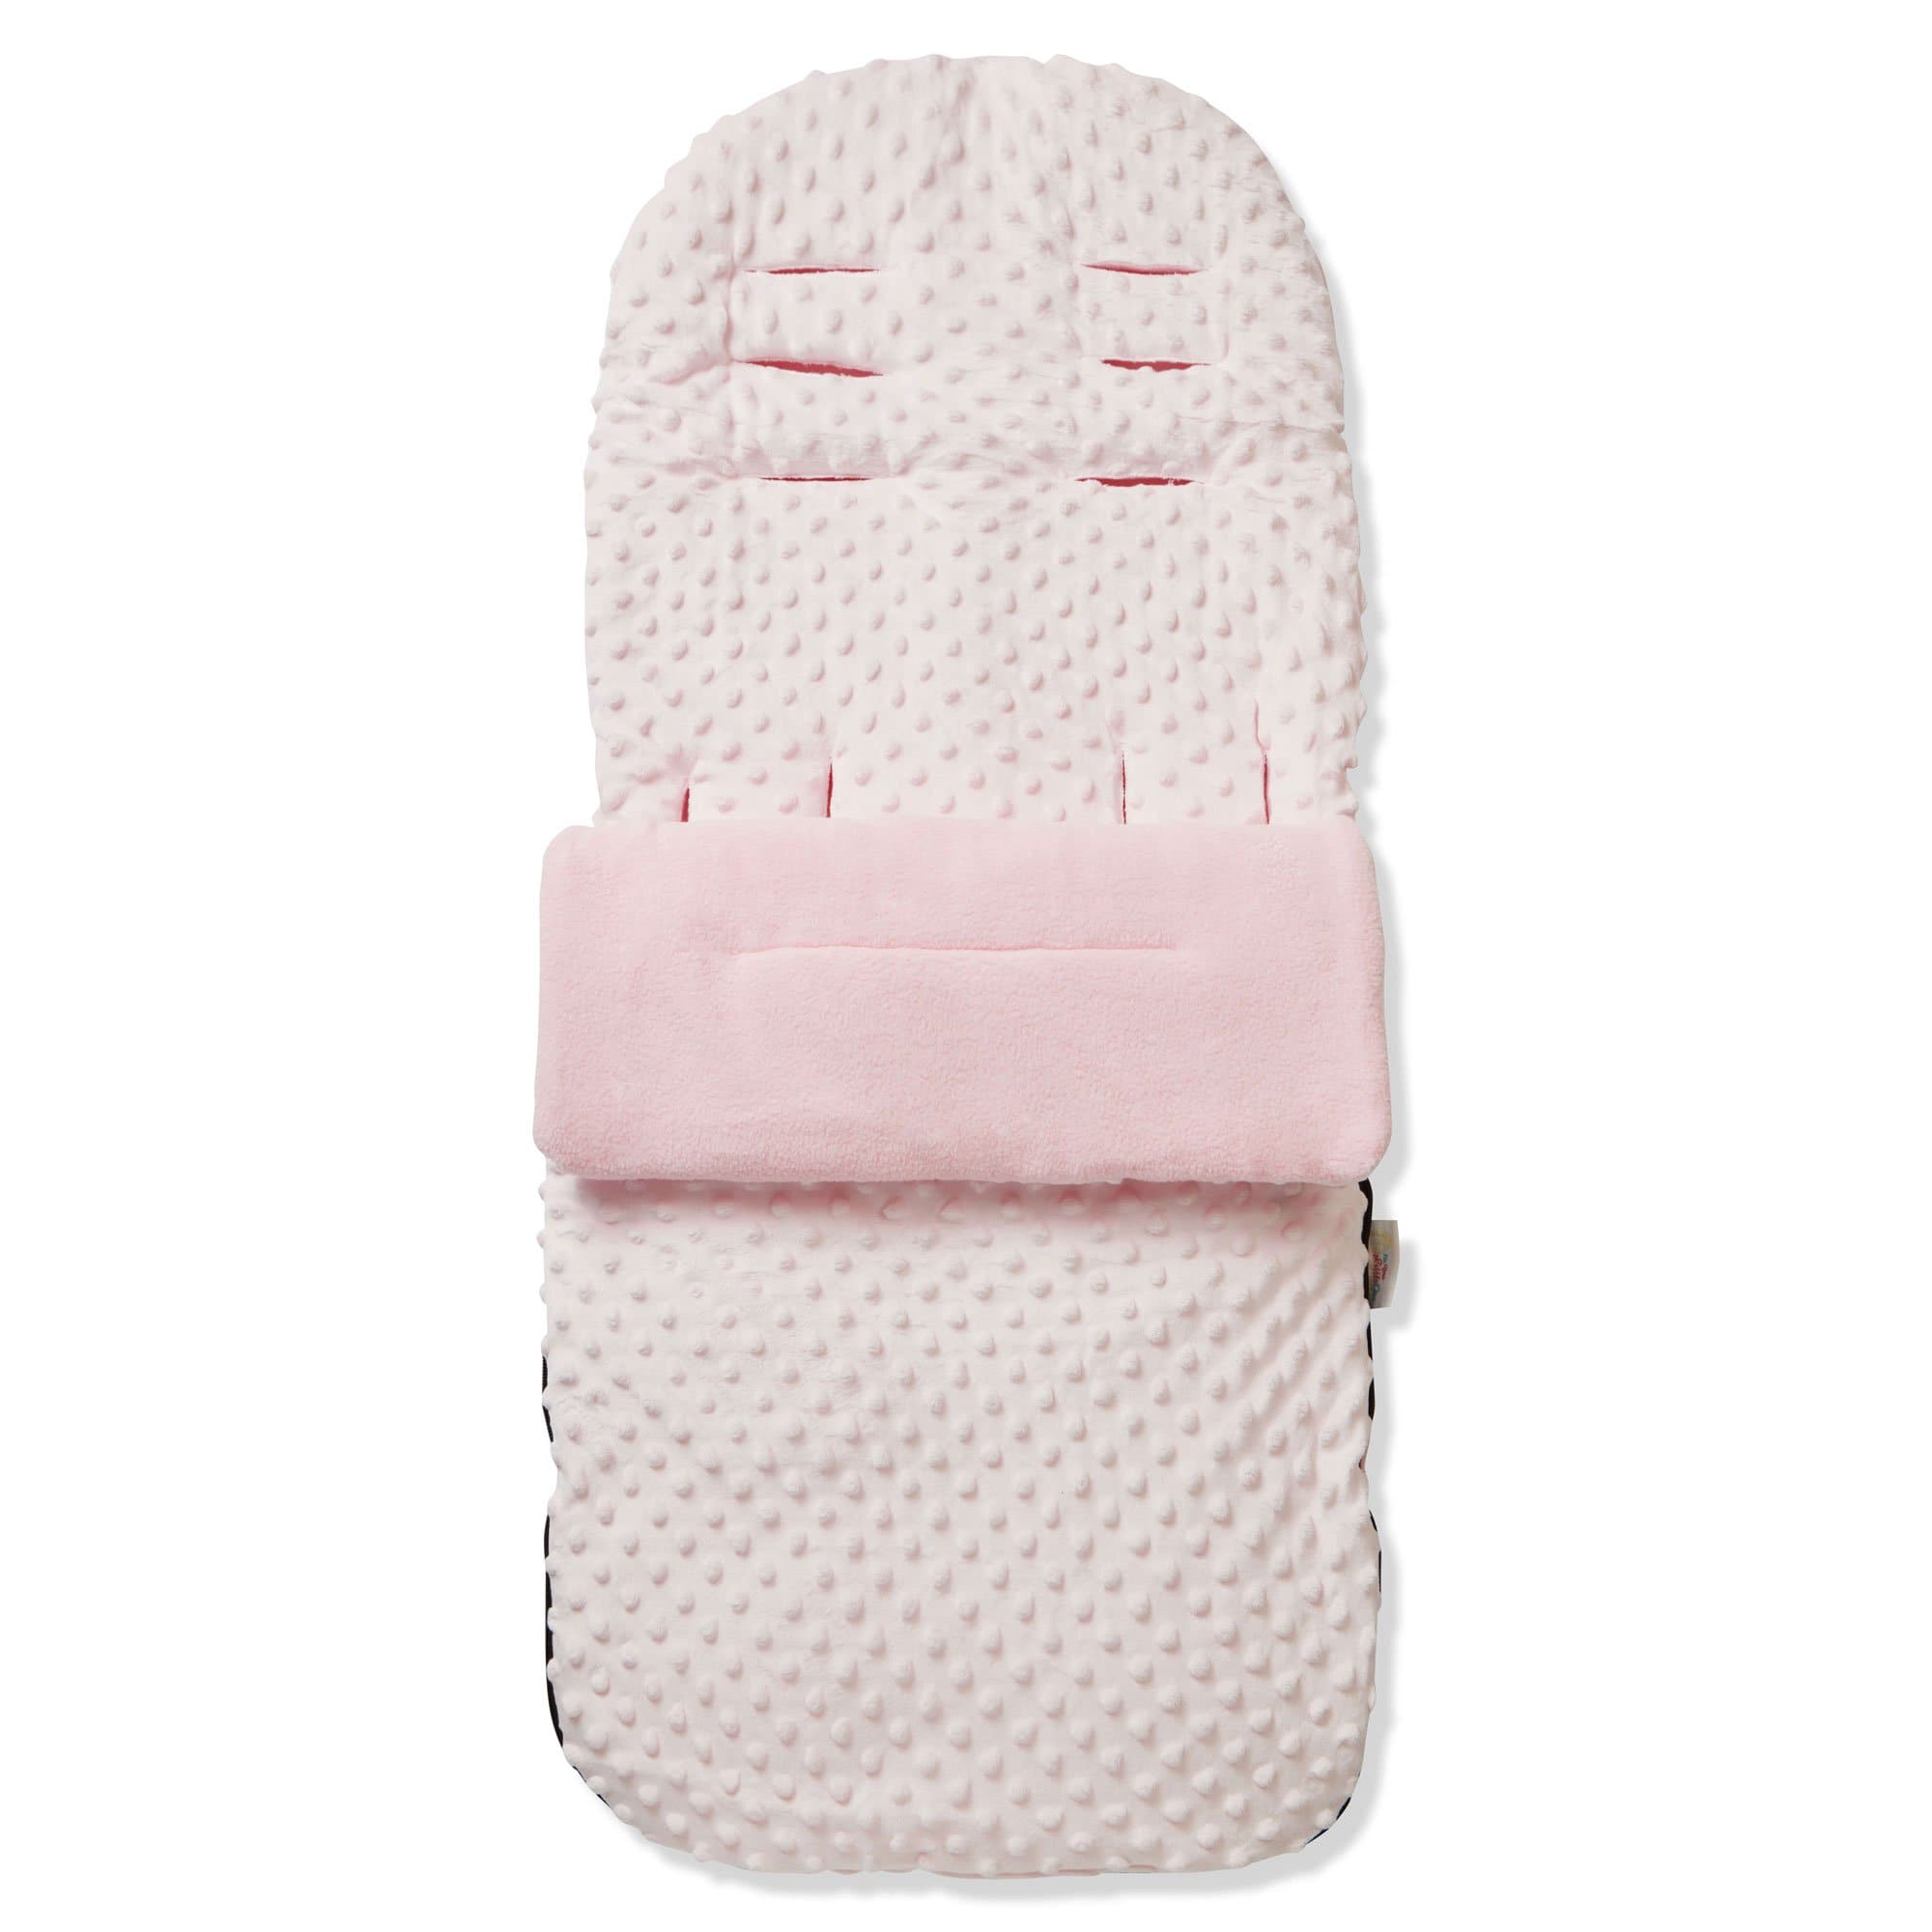 Dimple Footmuff / Cosy Toes Compatible with BabySun - Pink / Fits All Models | For Your Little One